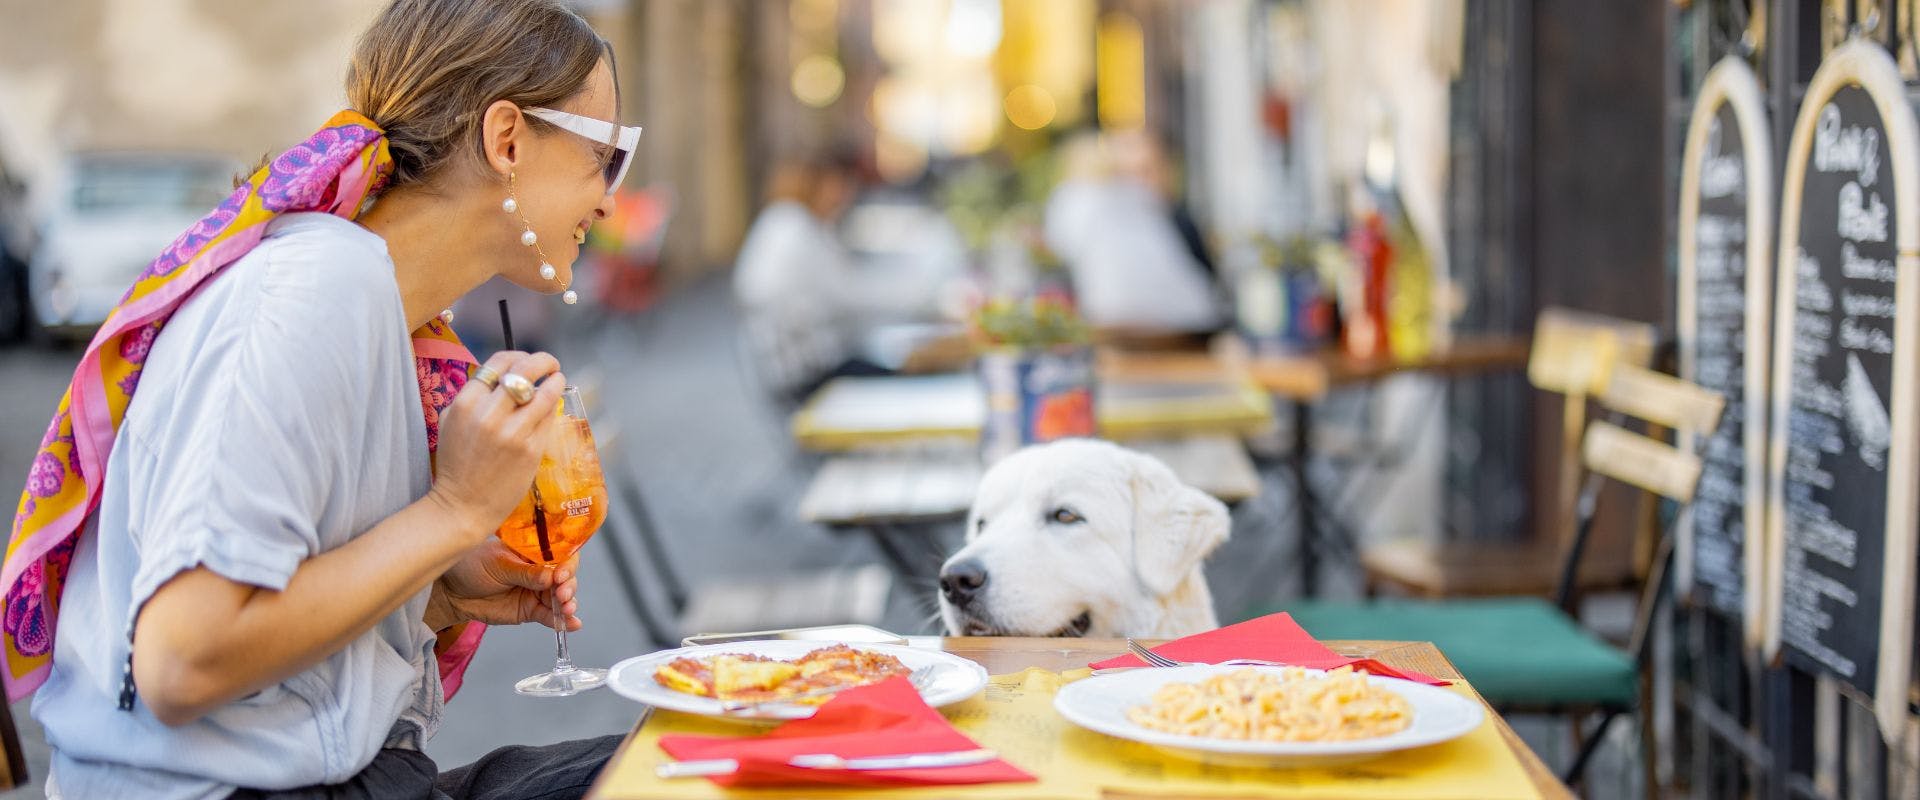 Woman eating Italian pasta while sitting with a dog at restaurant on the street in Rome 